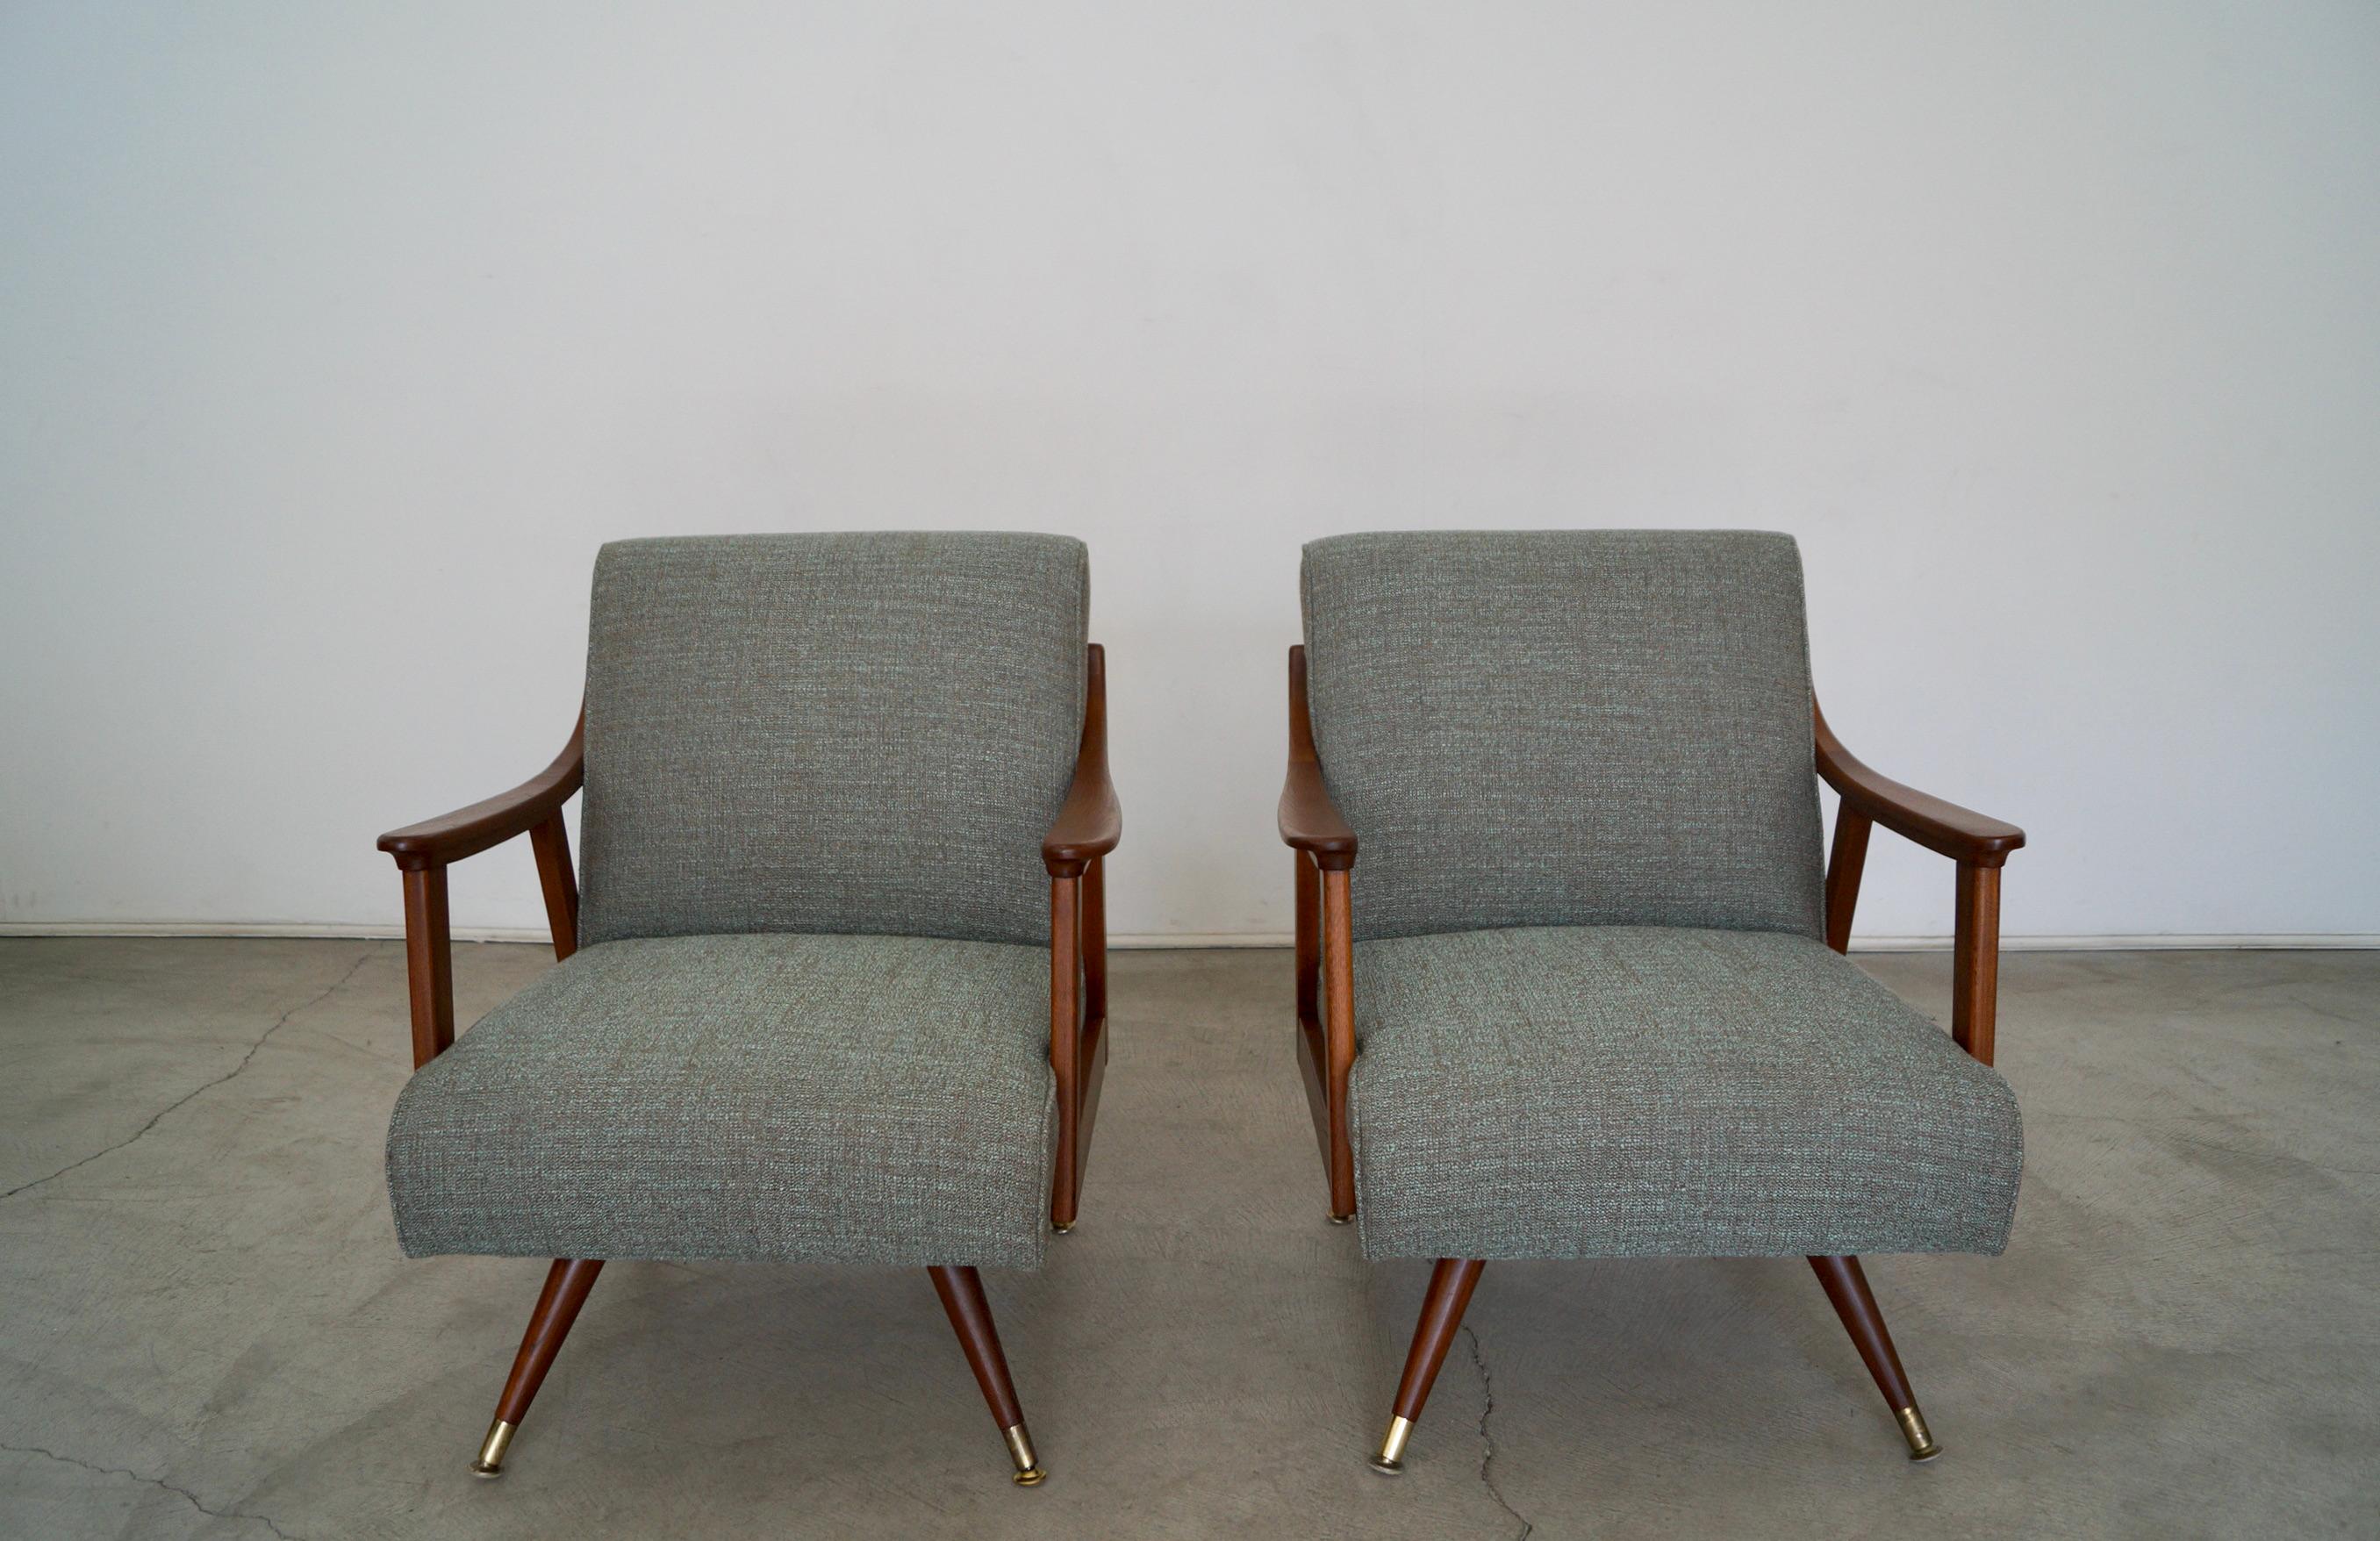 American 1950's Mid-Century Modern Lounge Chairs, a Pair